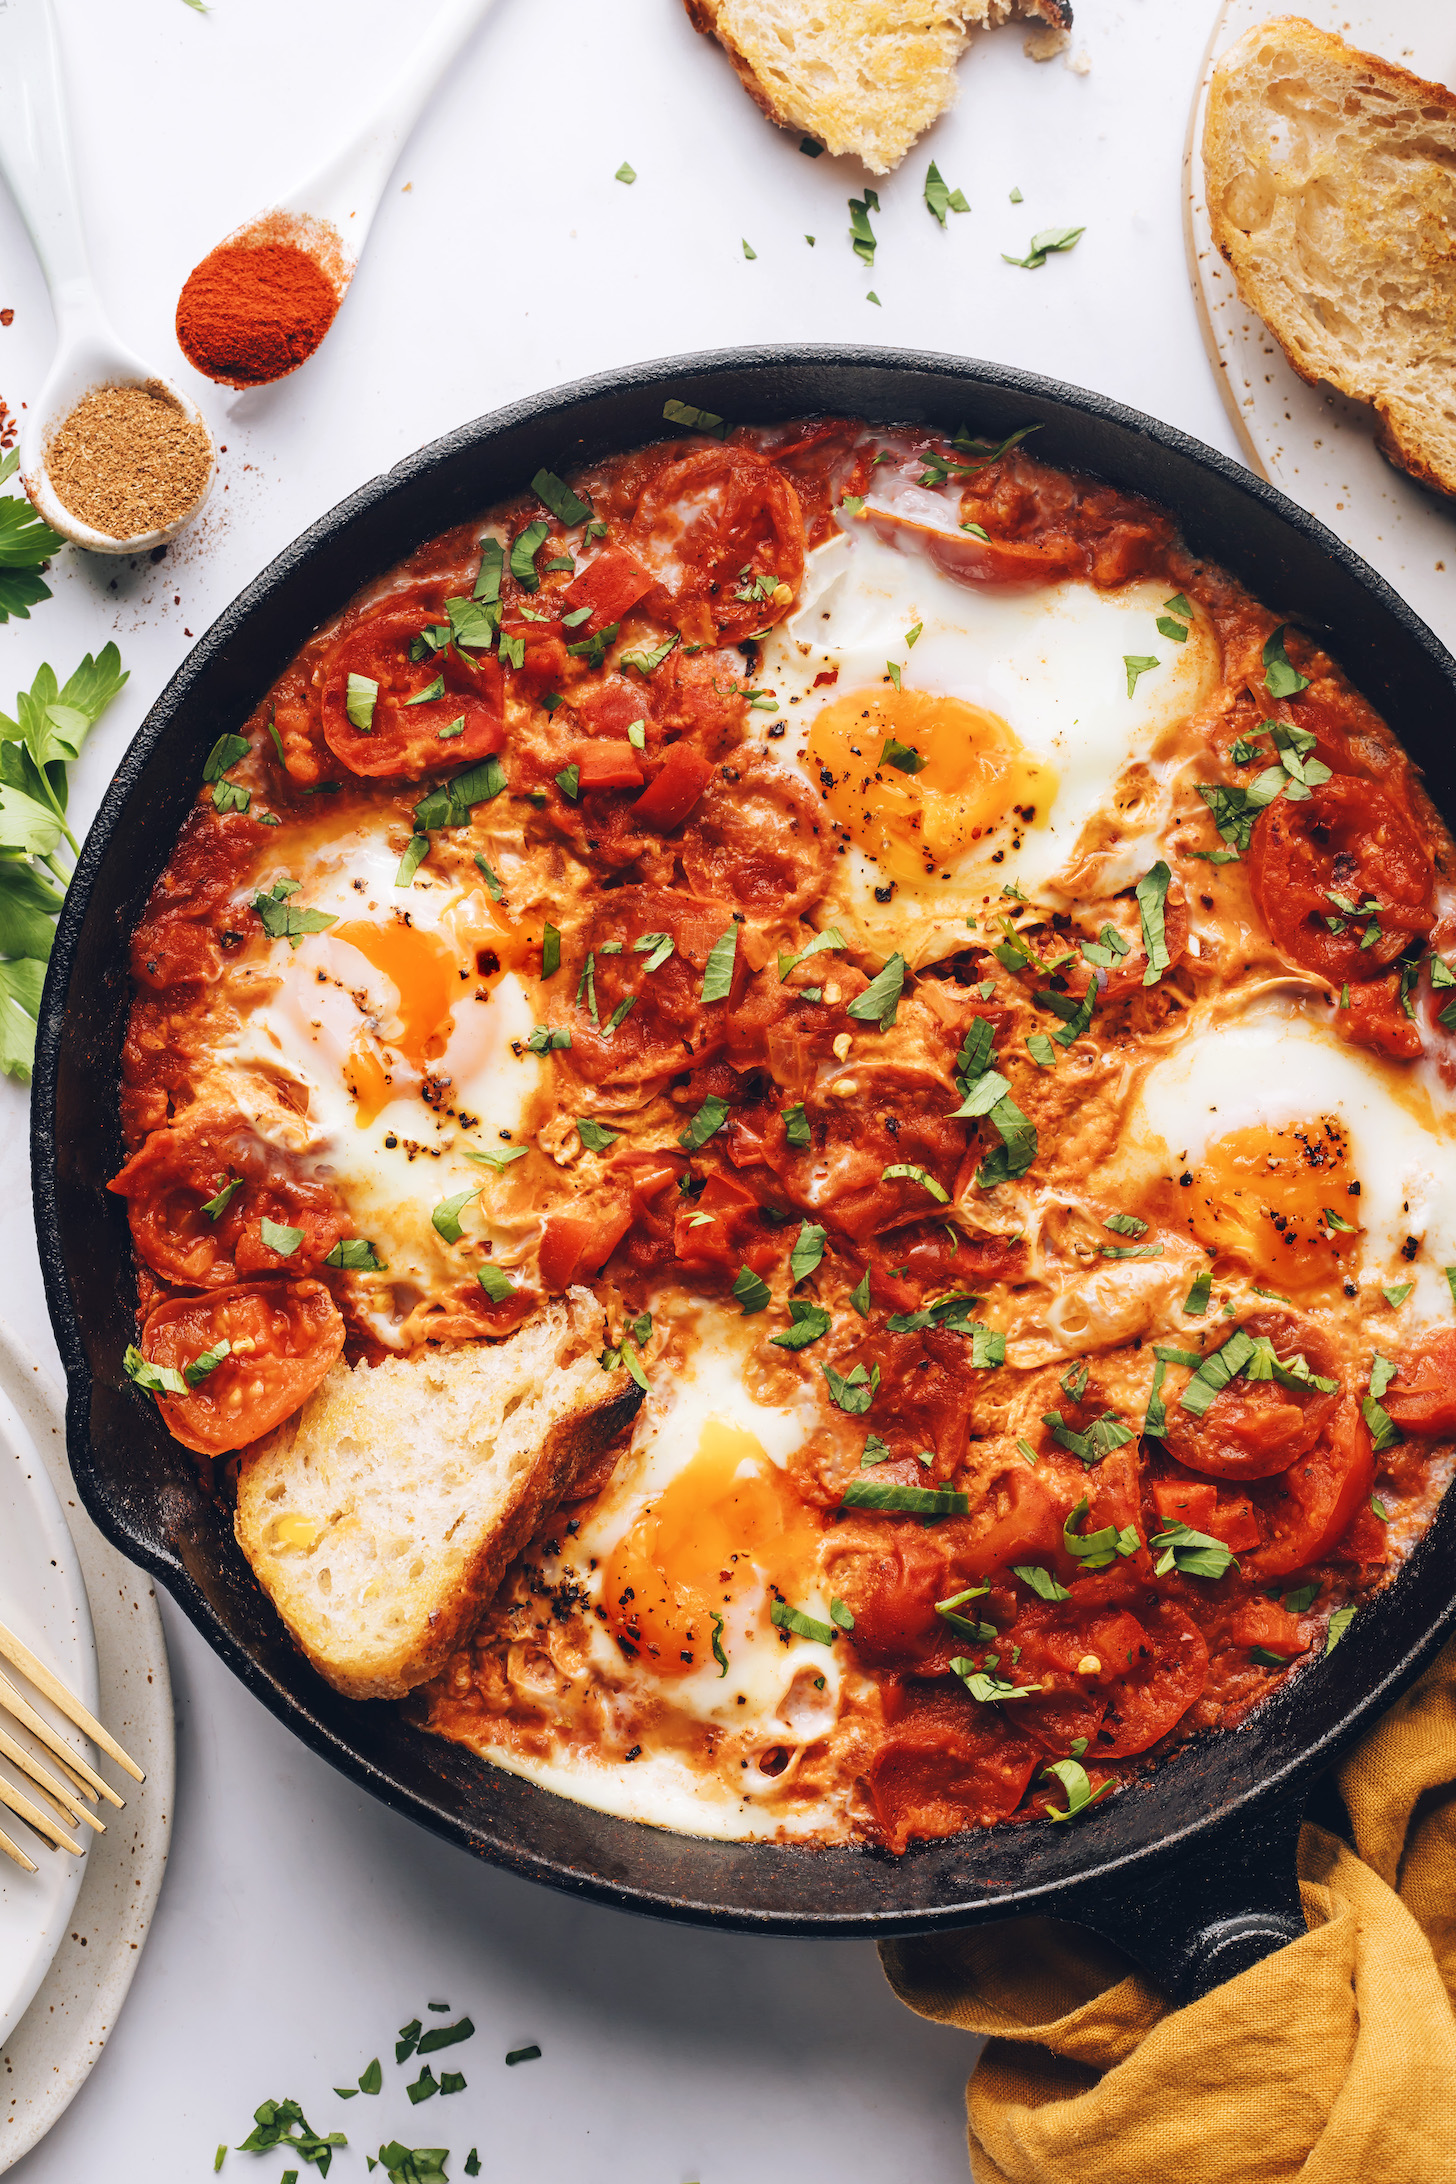 Toasted bread next to and in a skillet of shakshuka